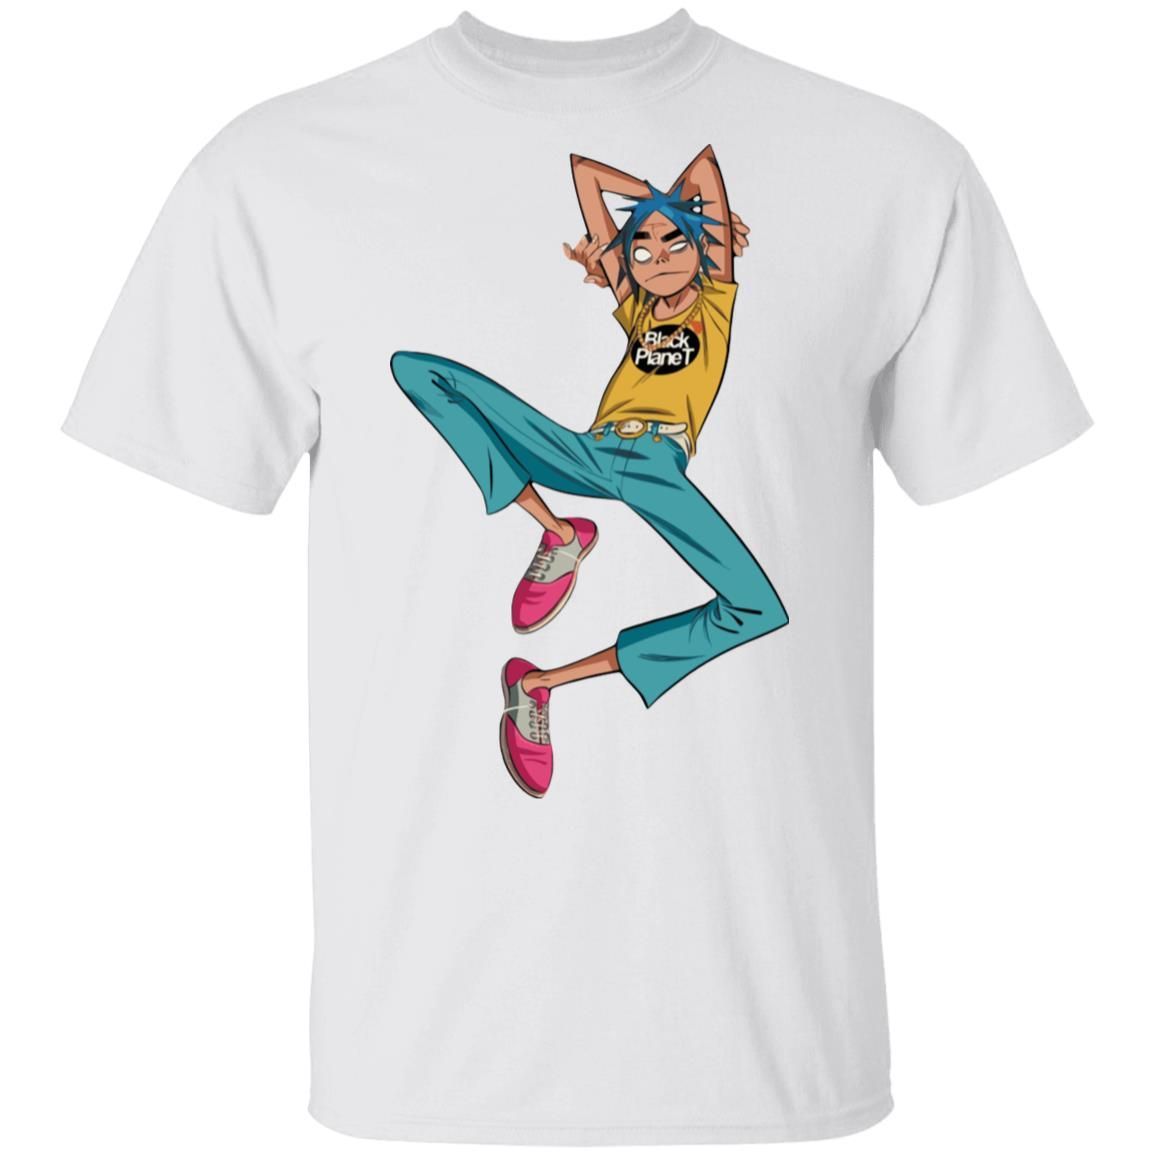 Get Animated with Gorillaz Official Shop